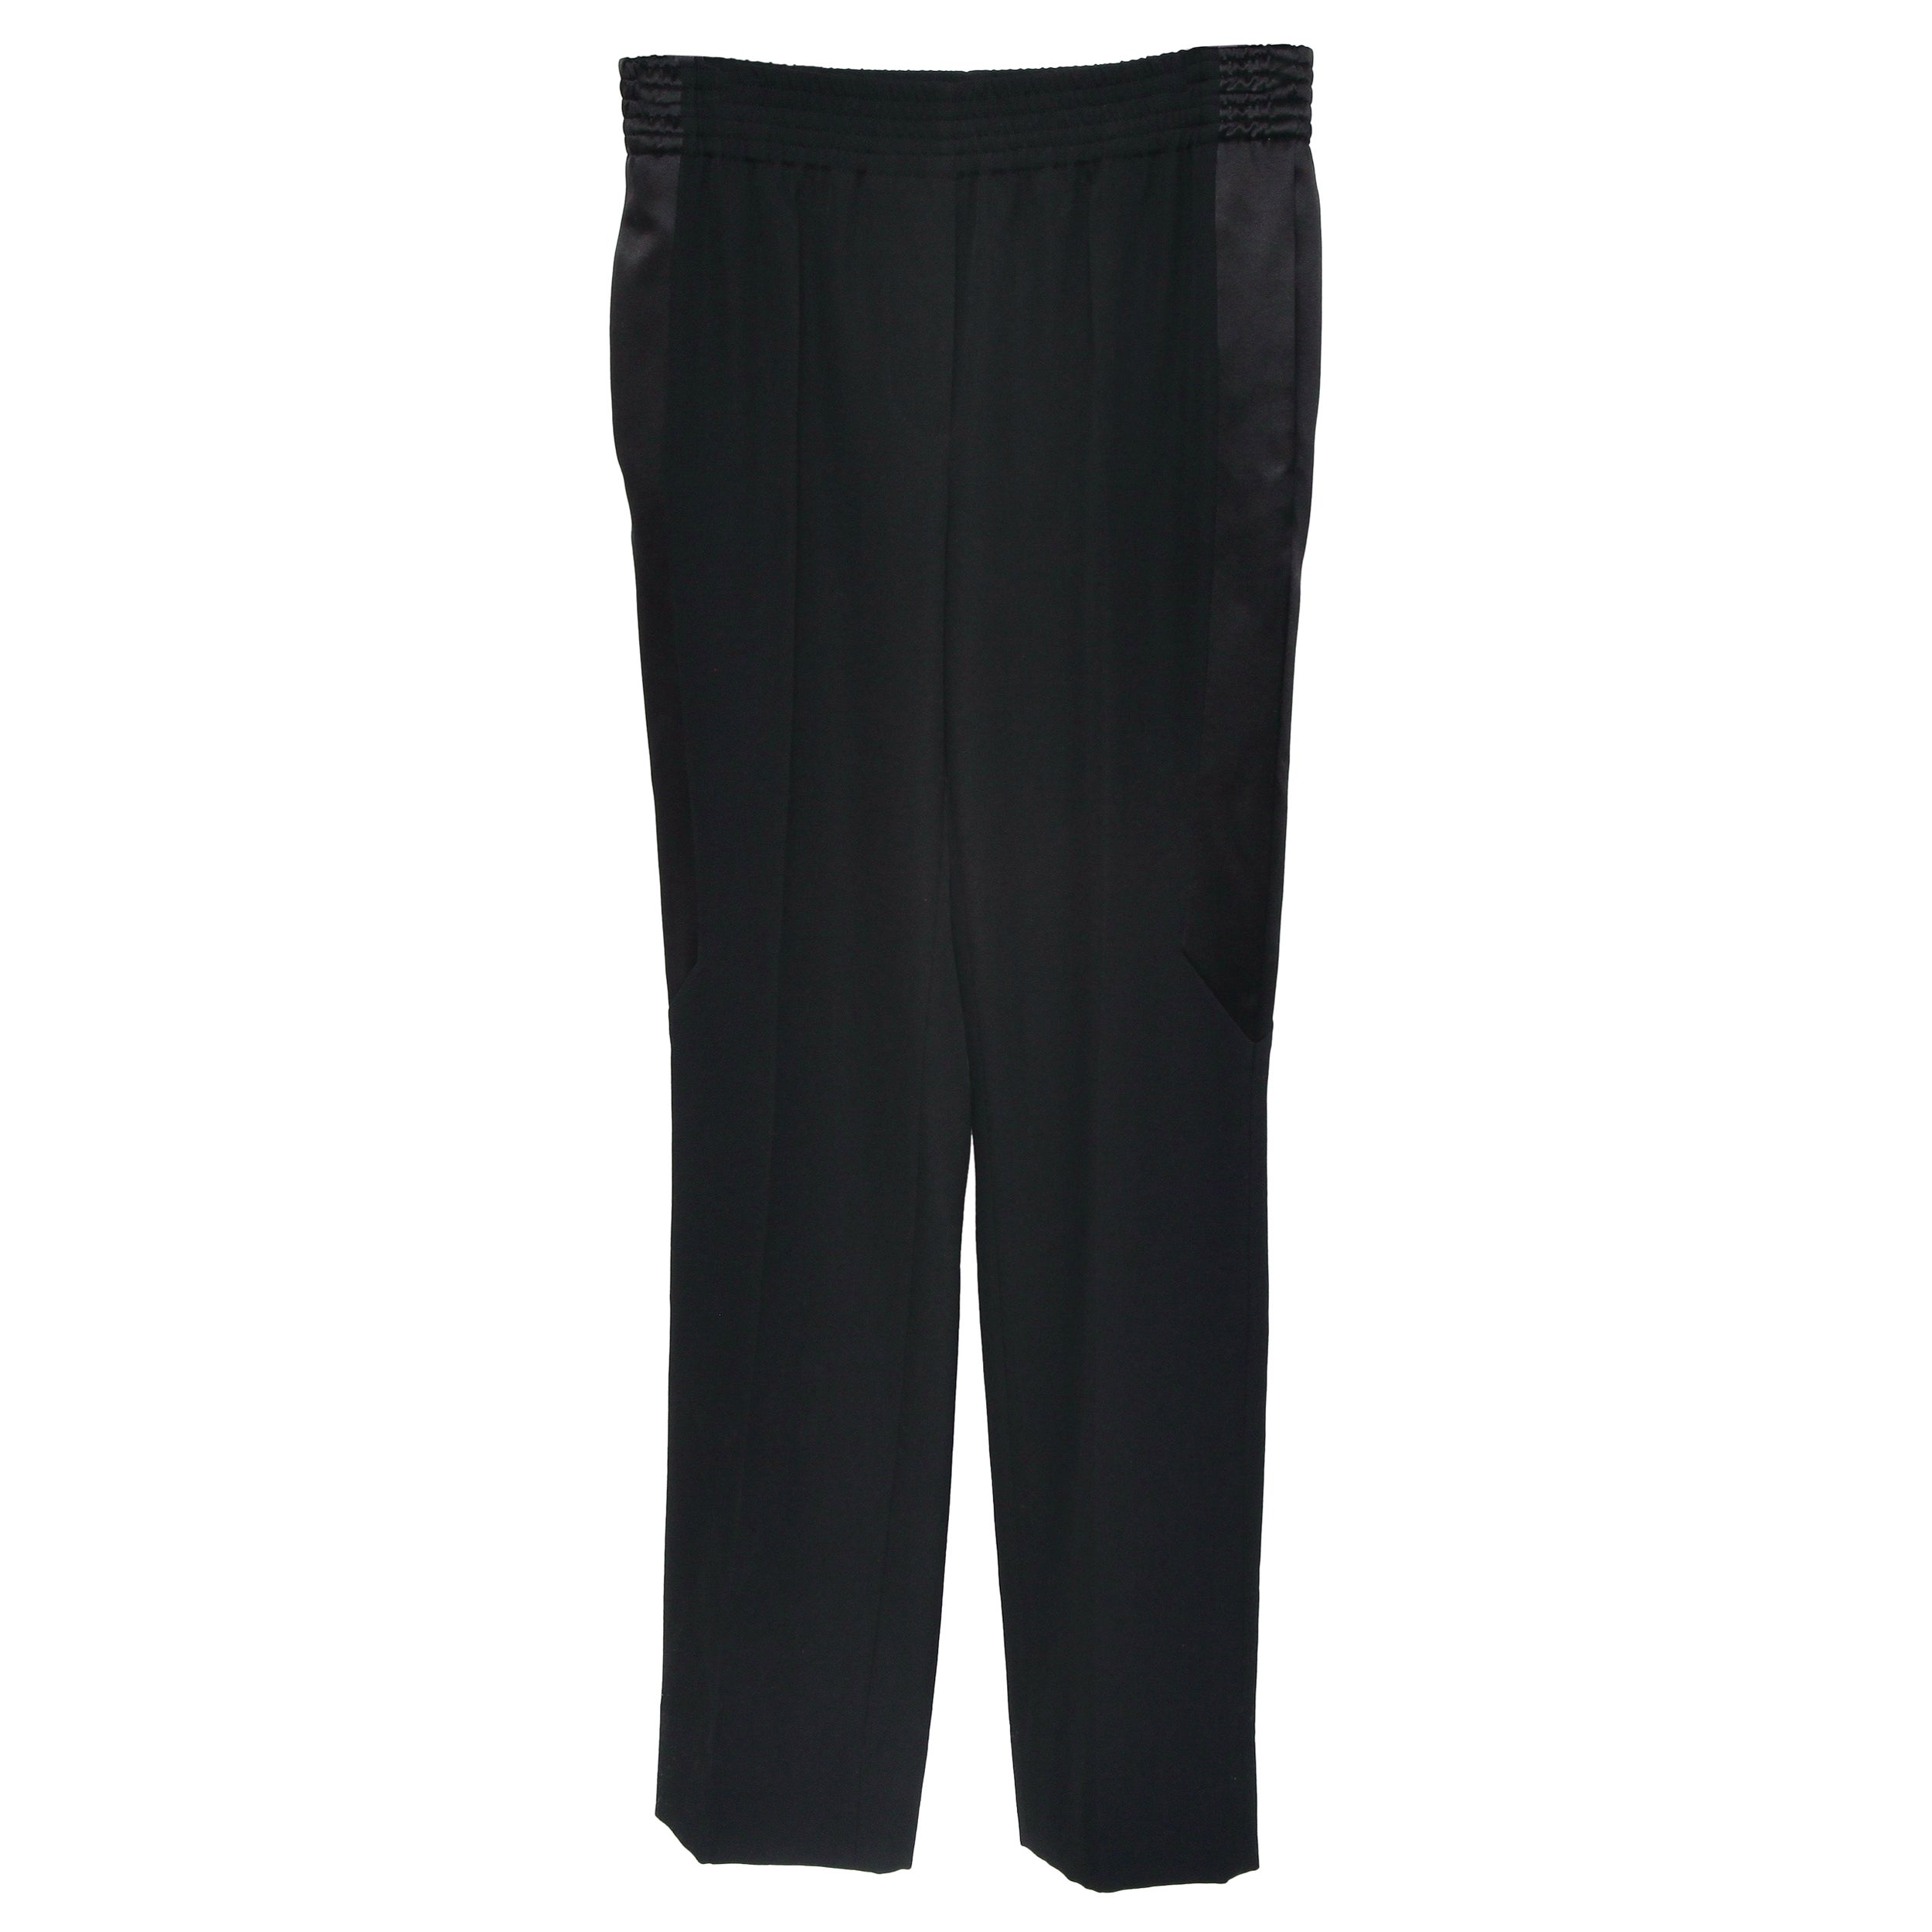 GUARANTEED AUTHENTIC GIVENCHY BLACK WOOL PANTS WITH SIDE PANELS

Retails excluding tax, $1,430
Details:
• Elasticized waist.
• Front side slip pockets.
• Rear slip pockets.
• Faux fly front.
• Center crease down leg.
• Side Viscose Silk blend